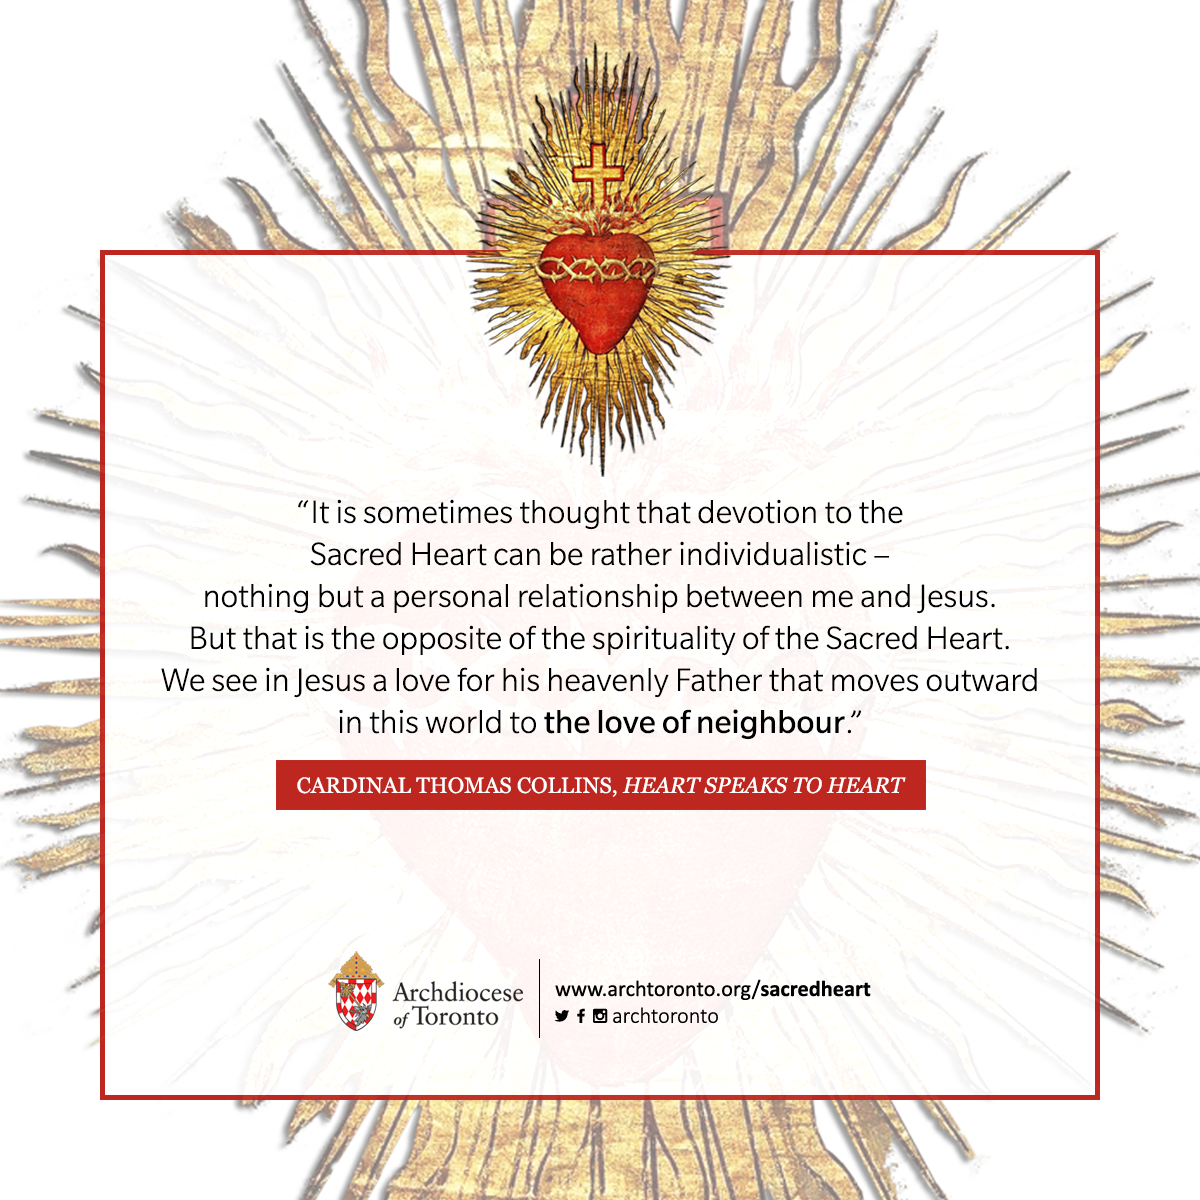 It is sometimes thought that devotion to the Sacred Heart can be rather individualistic – nothing but a personal relationship between me and Jesus. But that is the opposite of the spirituality of the Sacred Heart. We see in Jesus a love for his heavenly Father that moves outward in this world to the love of neighbour.